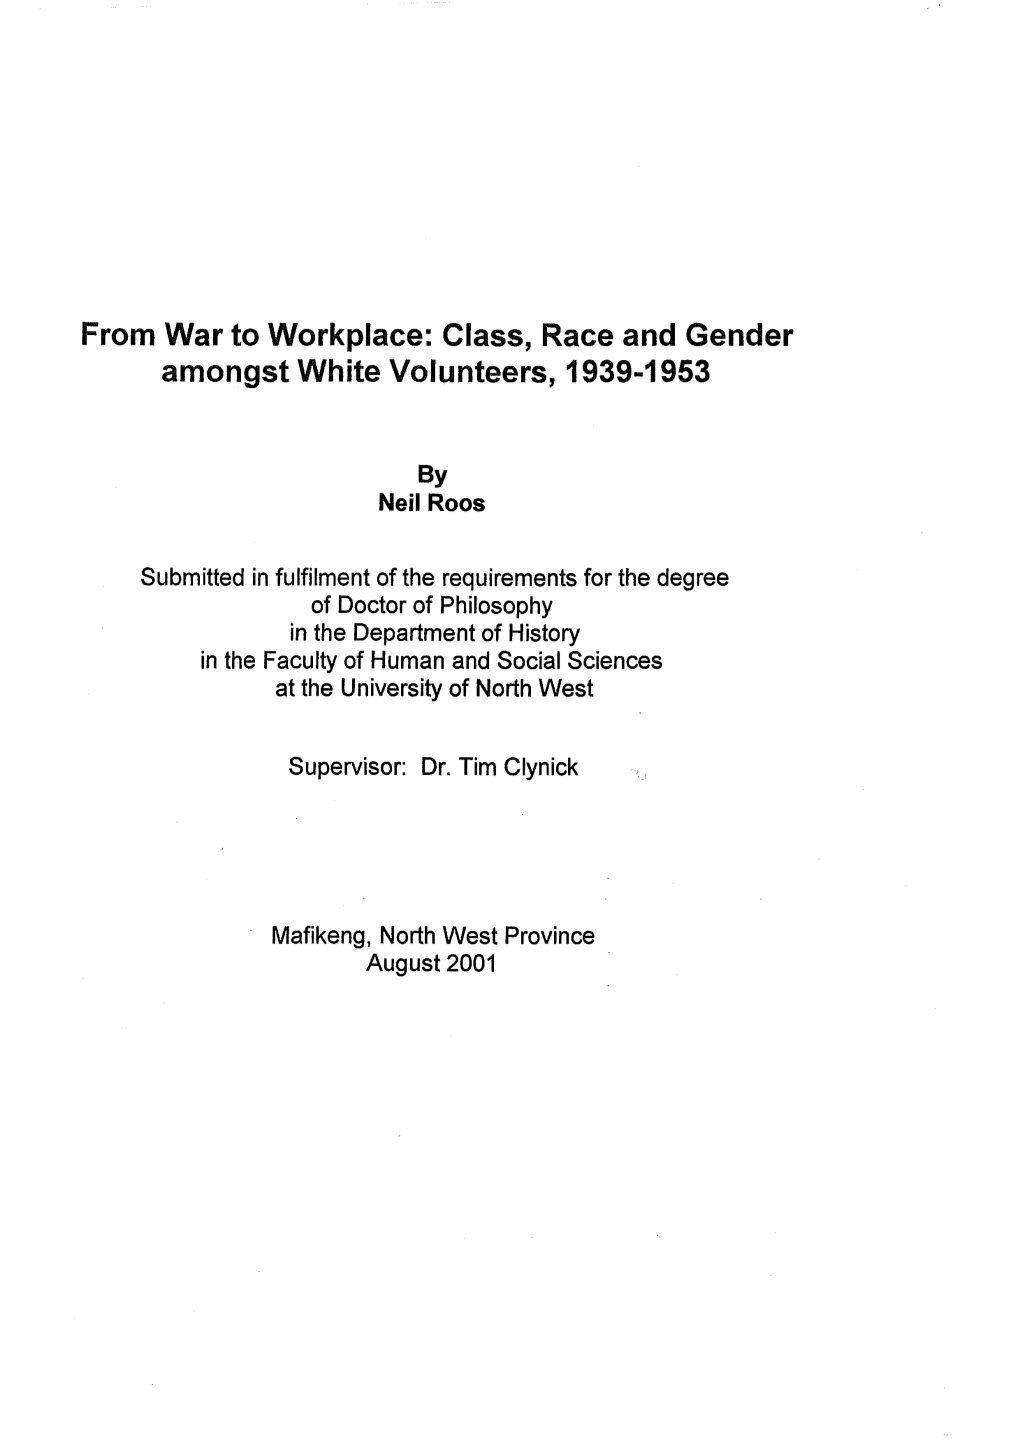 Class, Race and Gender Amongst White Volunteers, 1939-1953